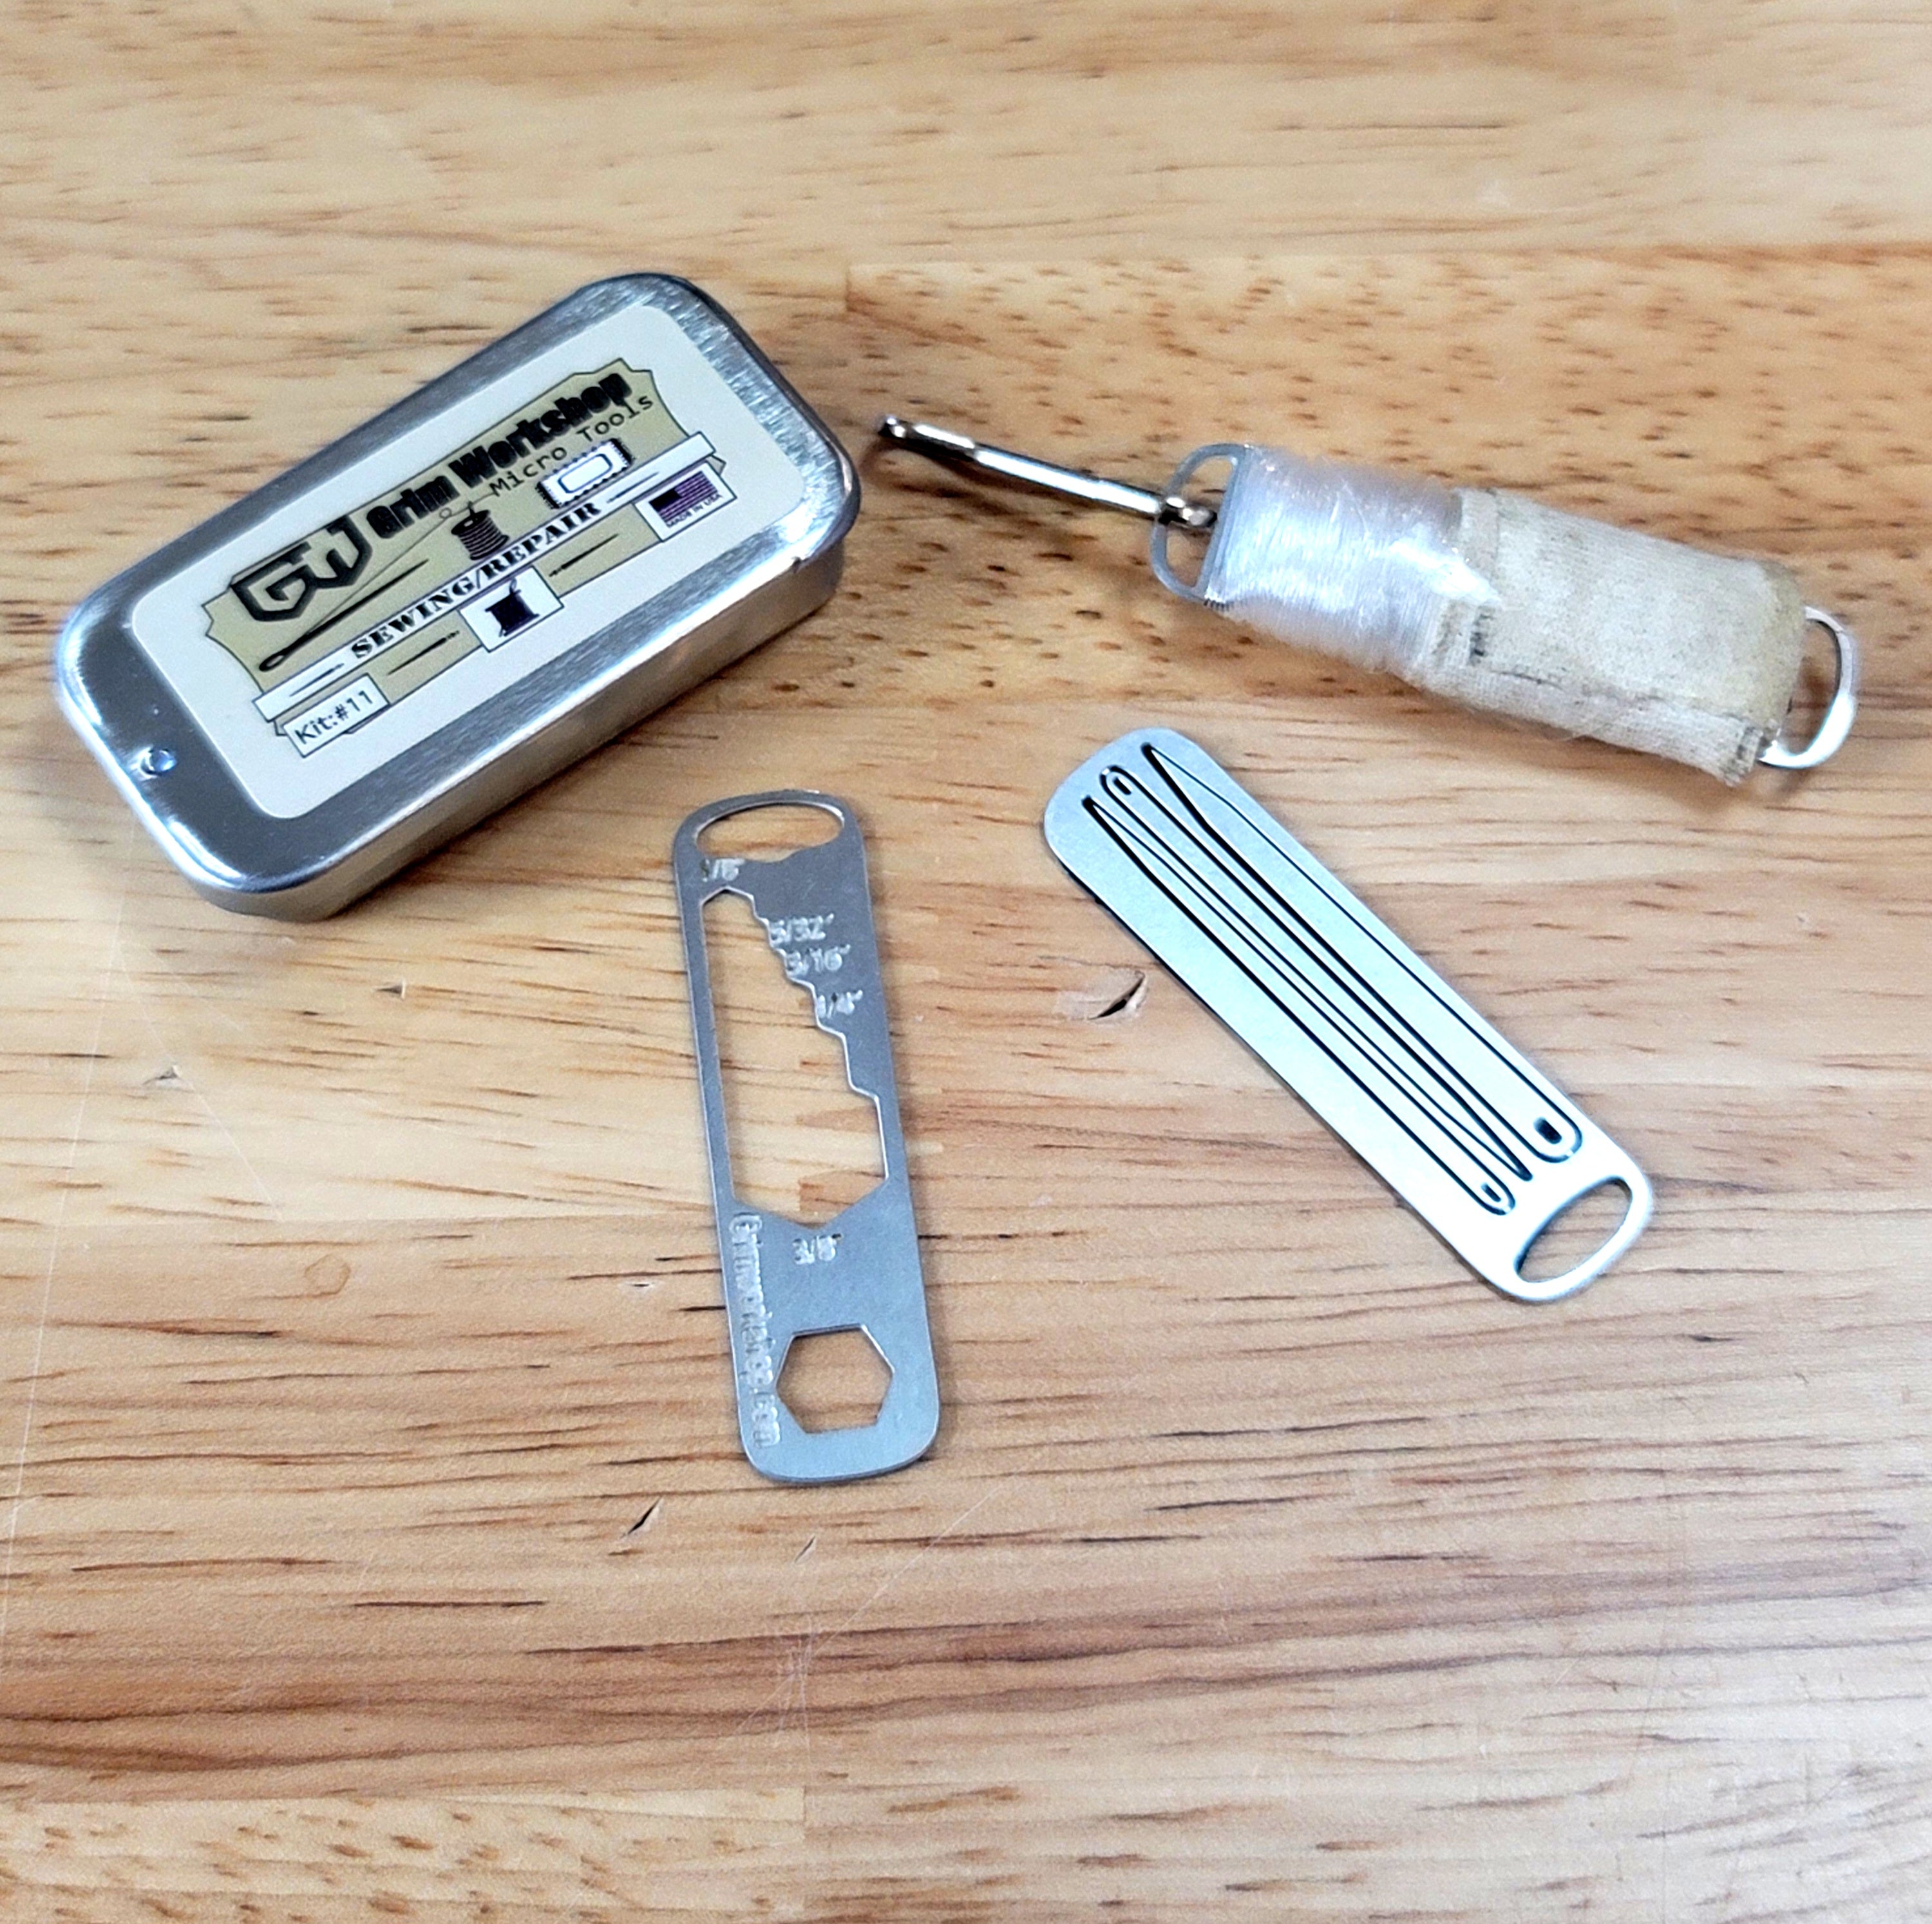 EDC Sewing and Repair Kit -Mini Sewing Kit That Fits in Your Pocket